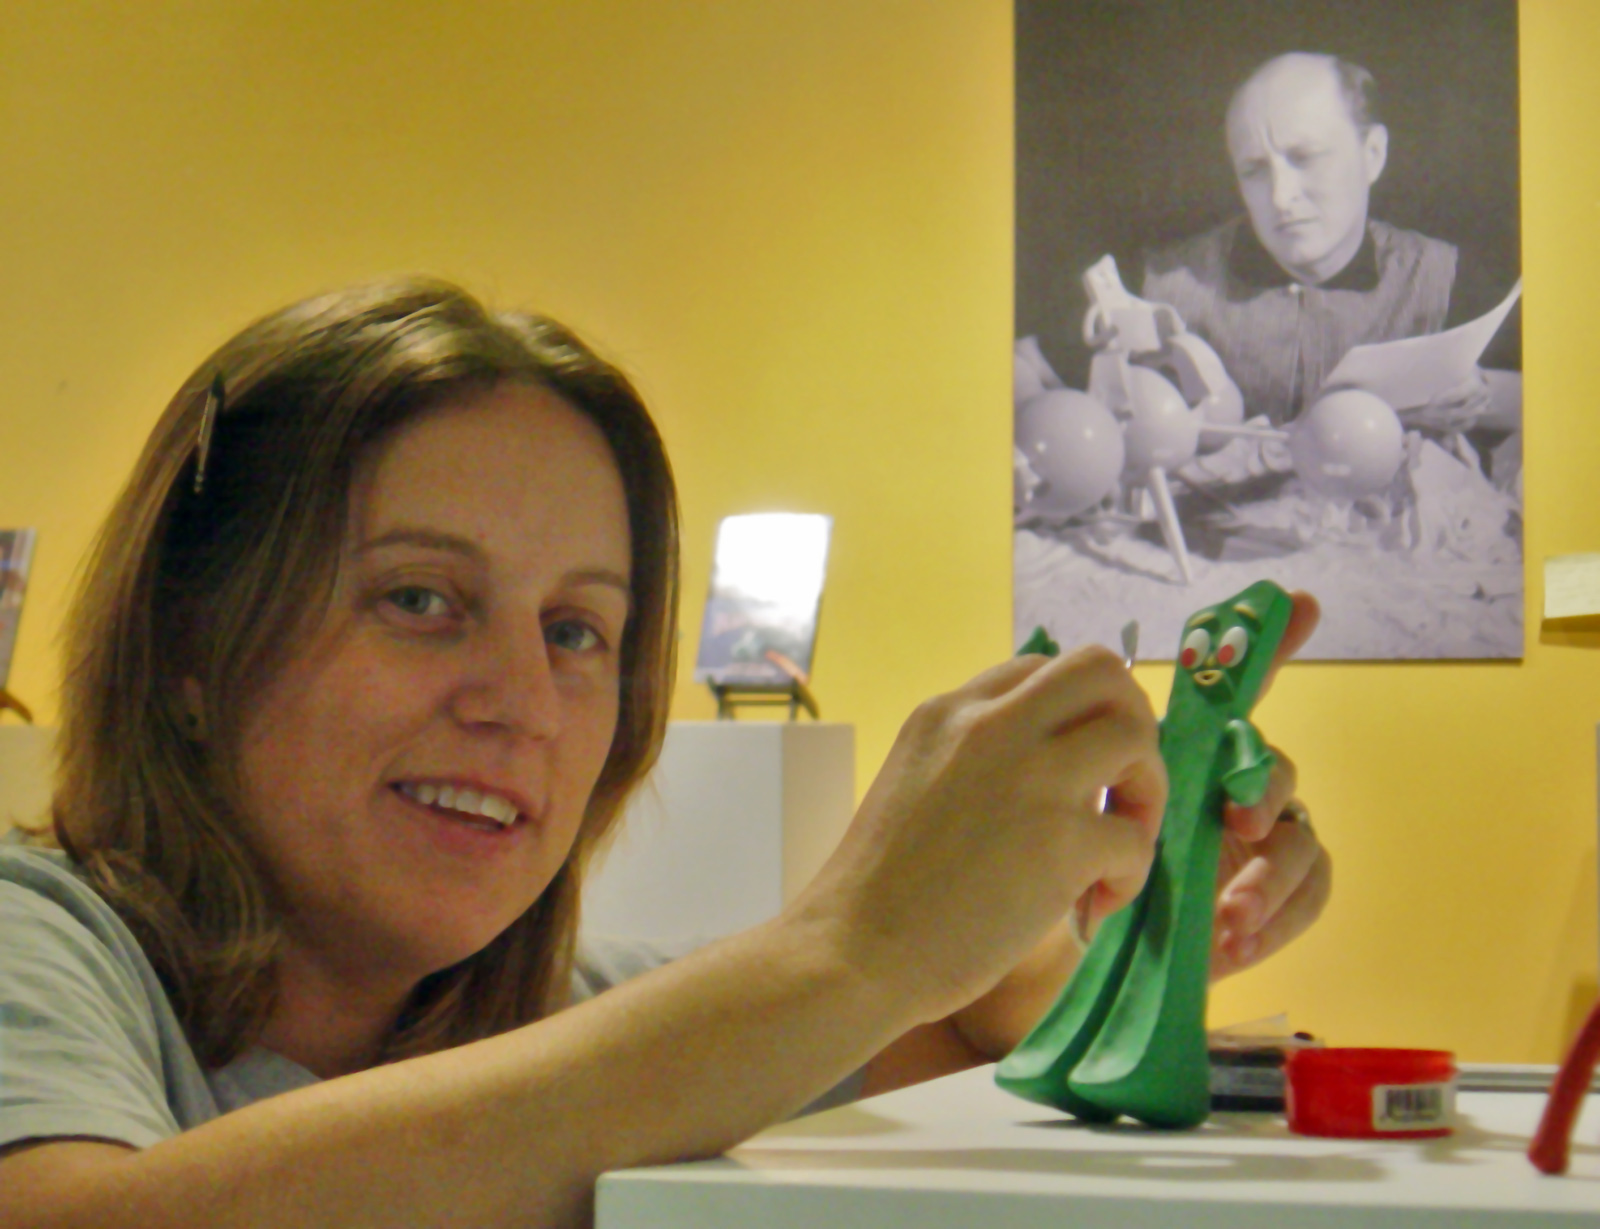 The Puppet Maker Career, An Interview with Gumby Puppet Maker Nicole LaPointe-McKay (Part Two)